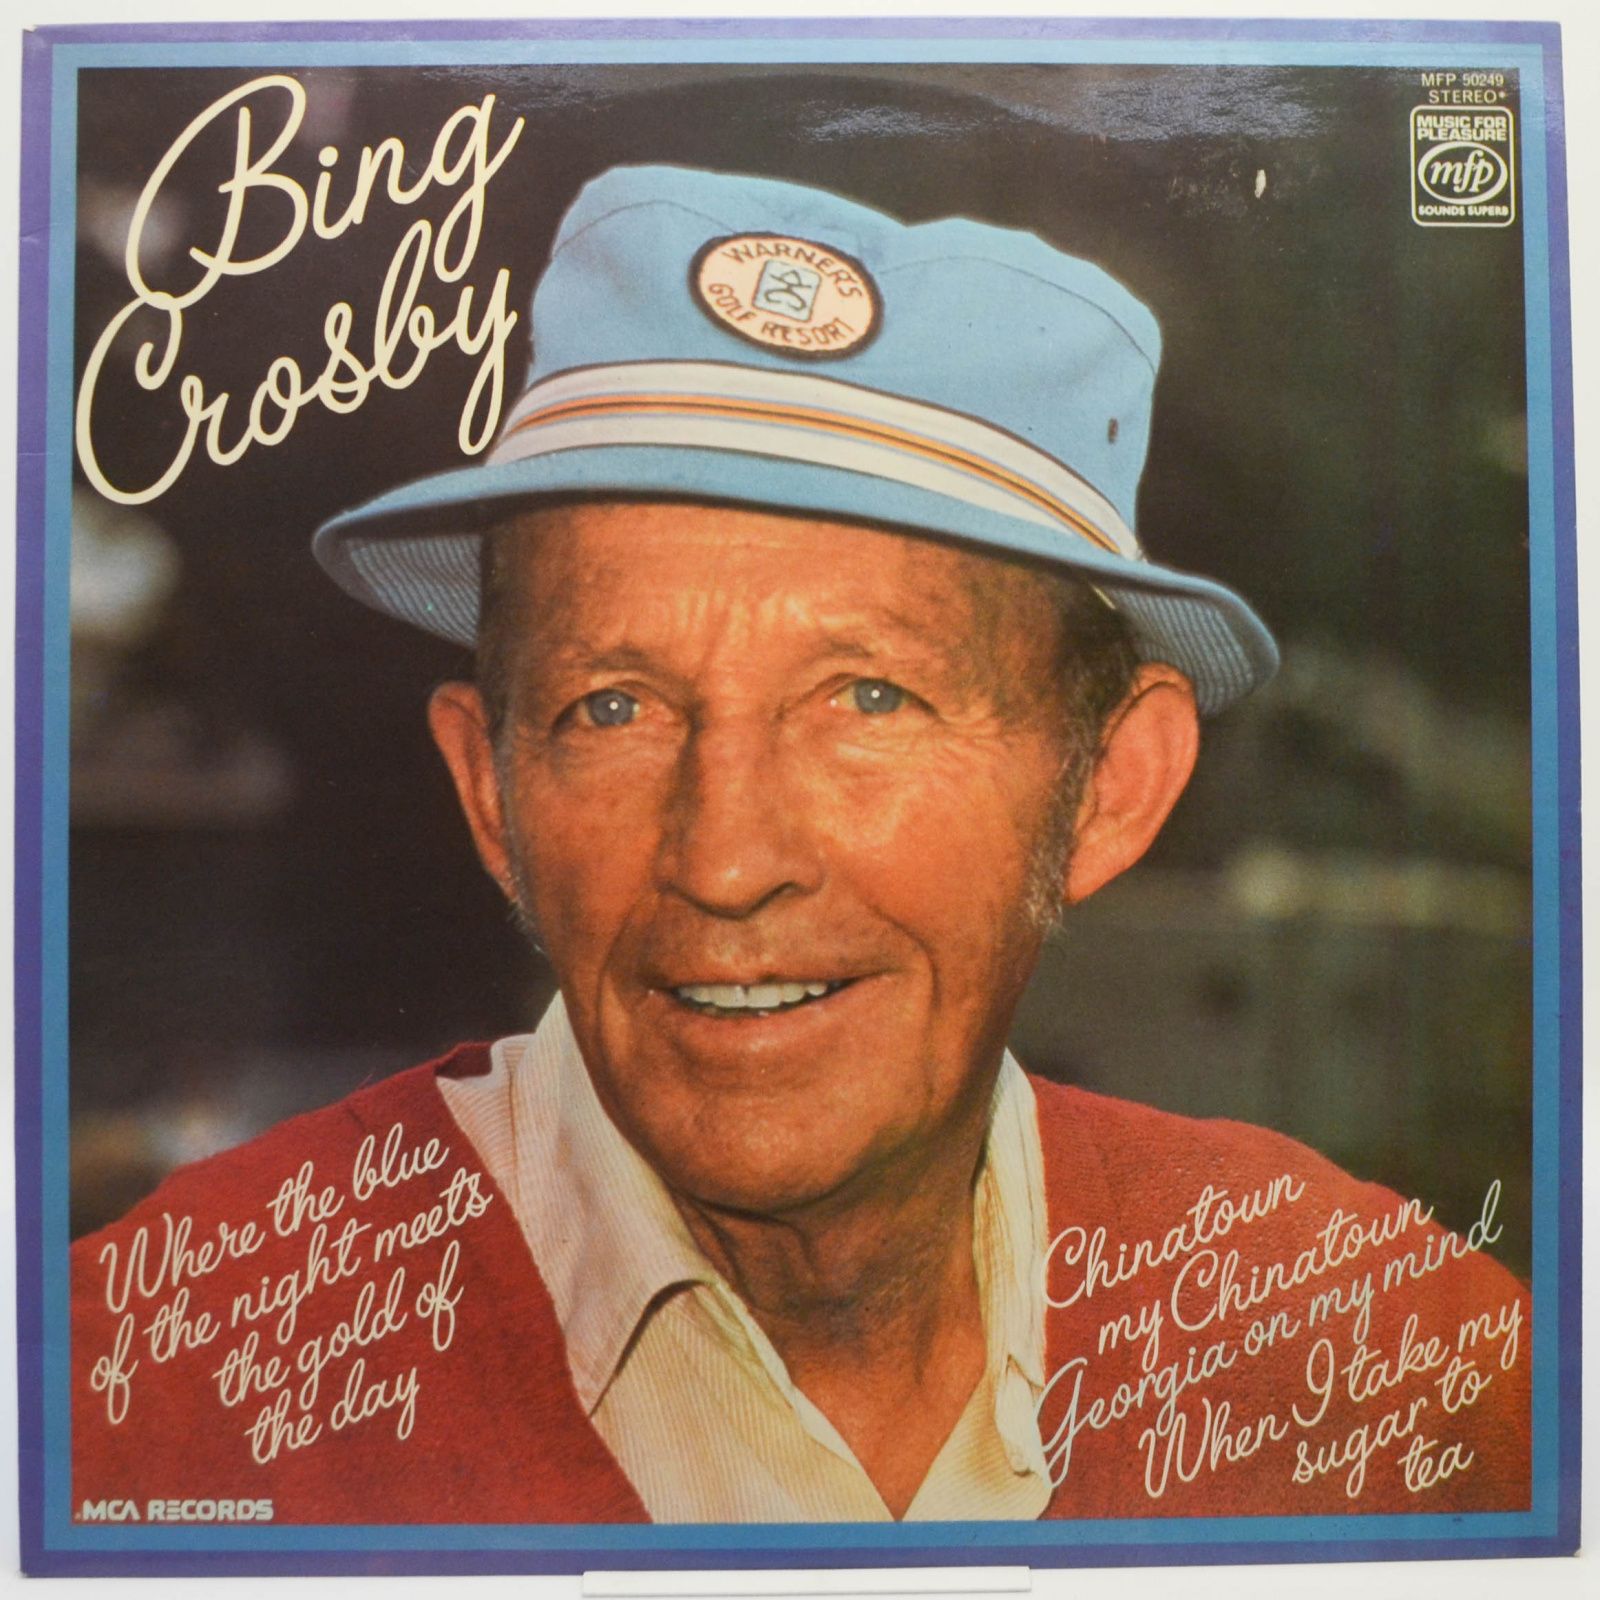 Bing Crosby — Where The Blue Of The Night Meets The Gold Of The Day (UK), 1974